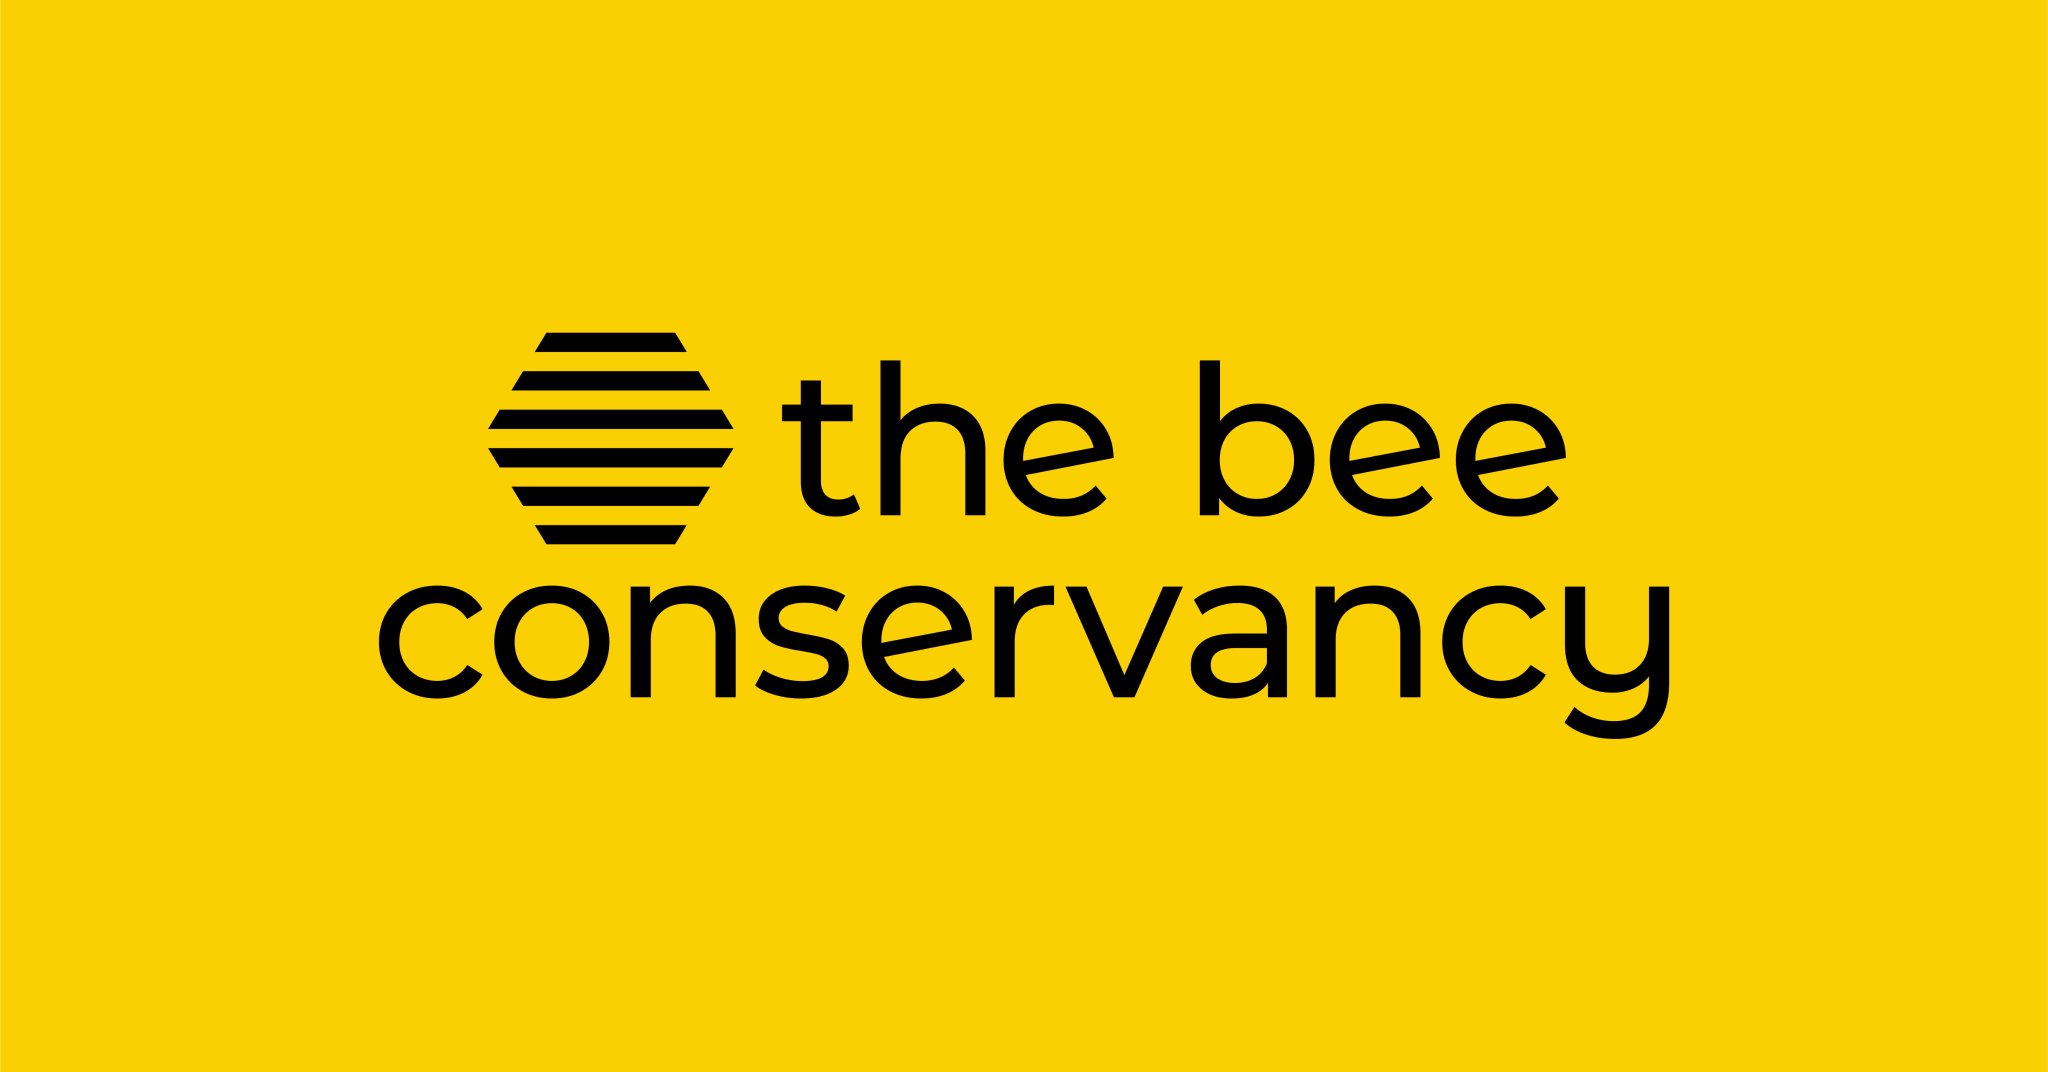 Why Bees? - The Bee Conservancy